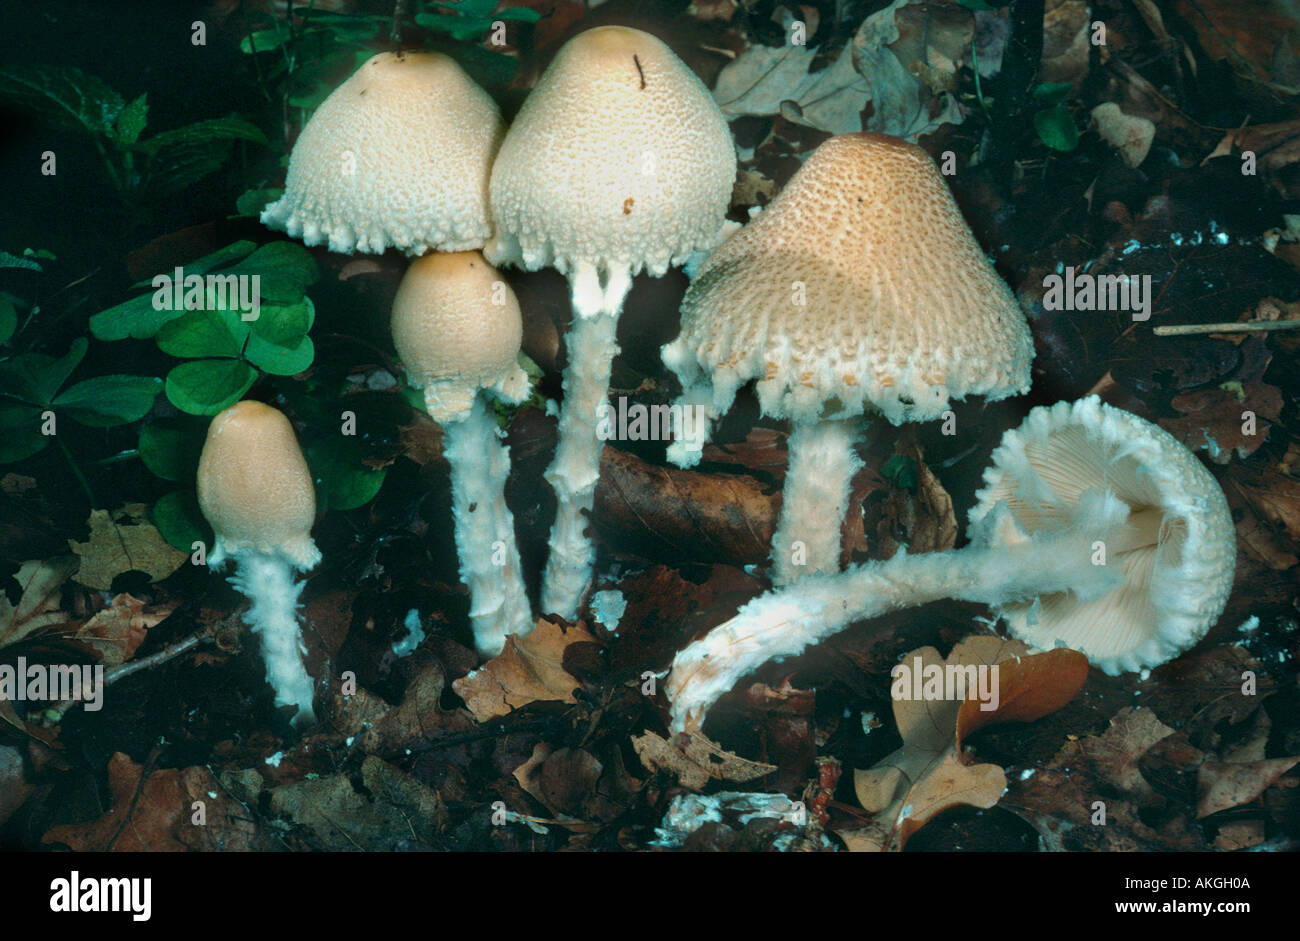 shield dapperling (Lepiota clypeolaria), group at the forest ground, Germany, Bavaria Stock Photo